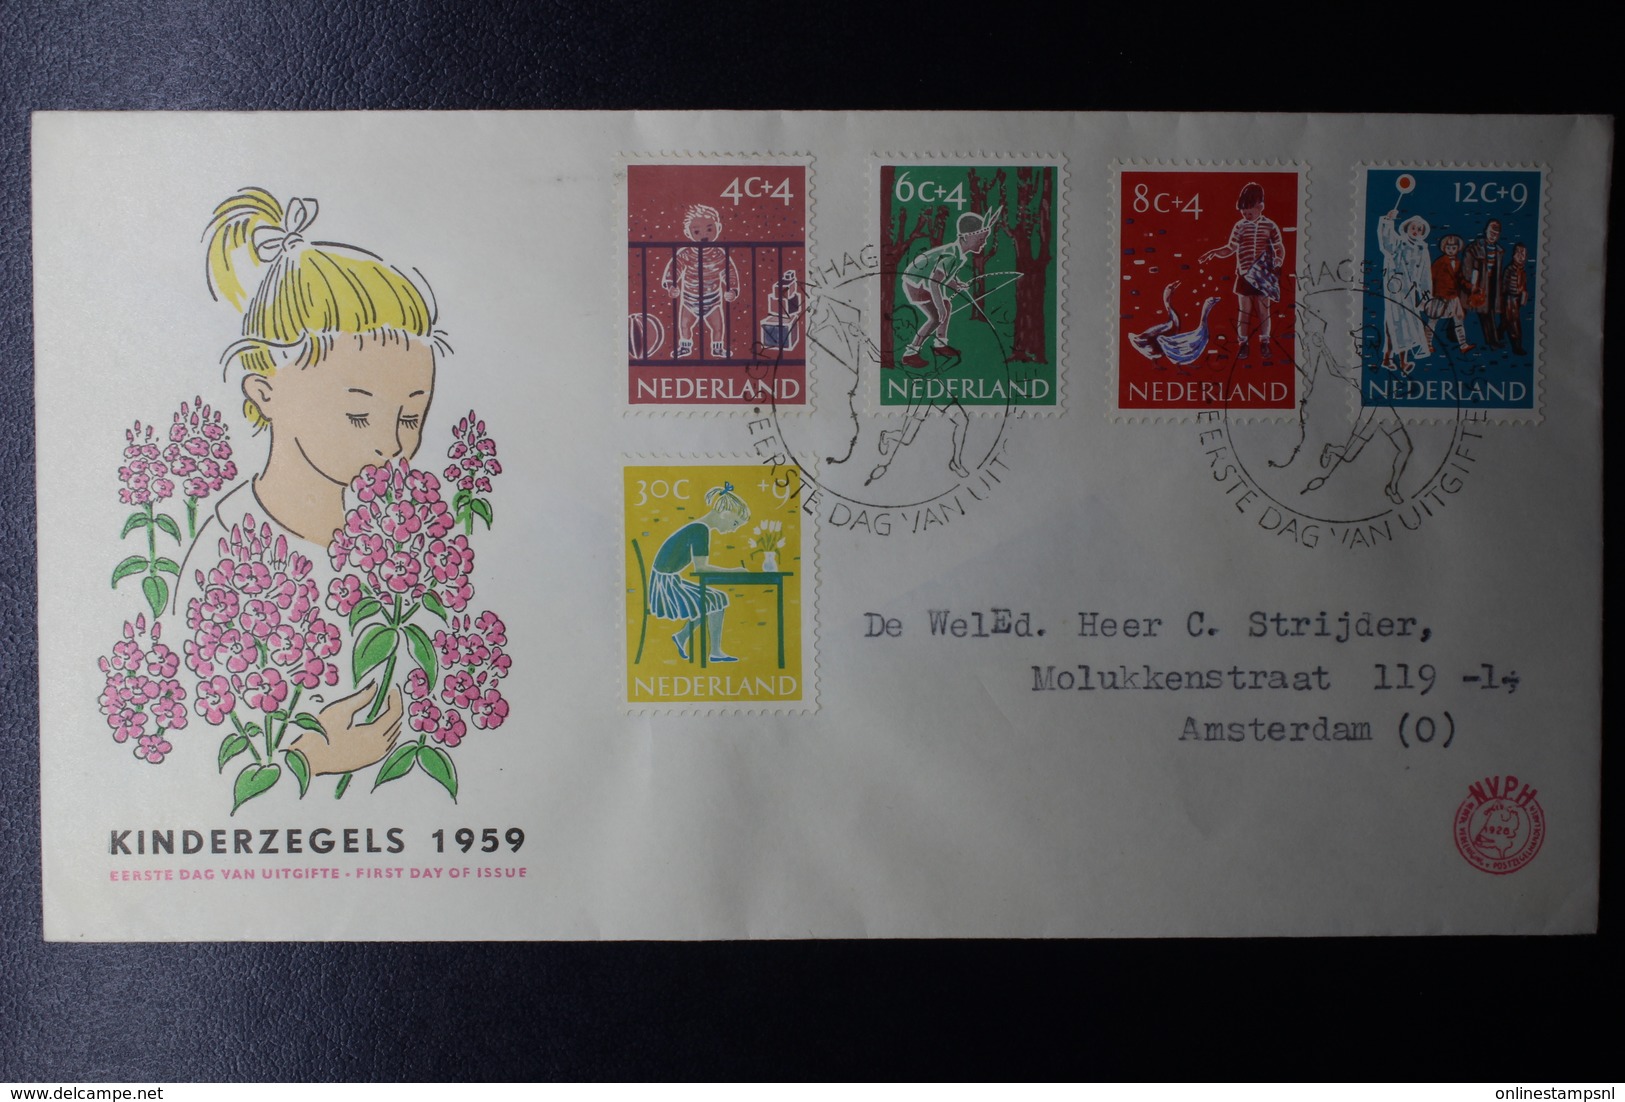 Netherlands: 13 early FDC's between 1953 - 1955  E15 and E43, with typed addresses CV NVPH 2020:  413 euro